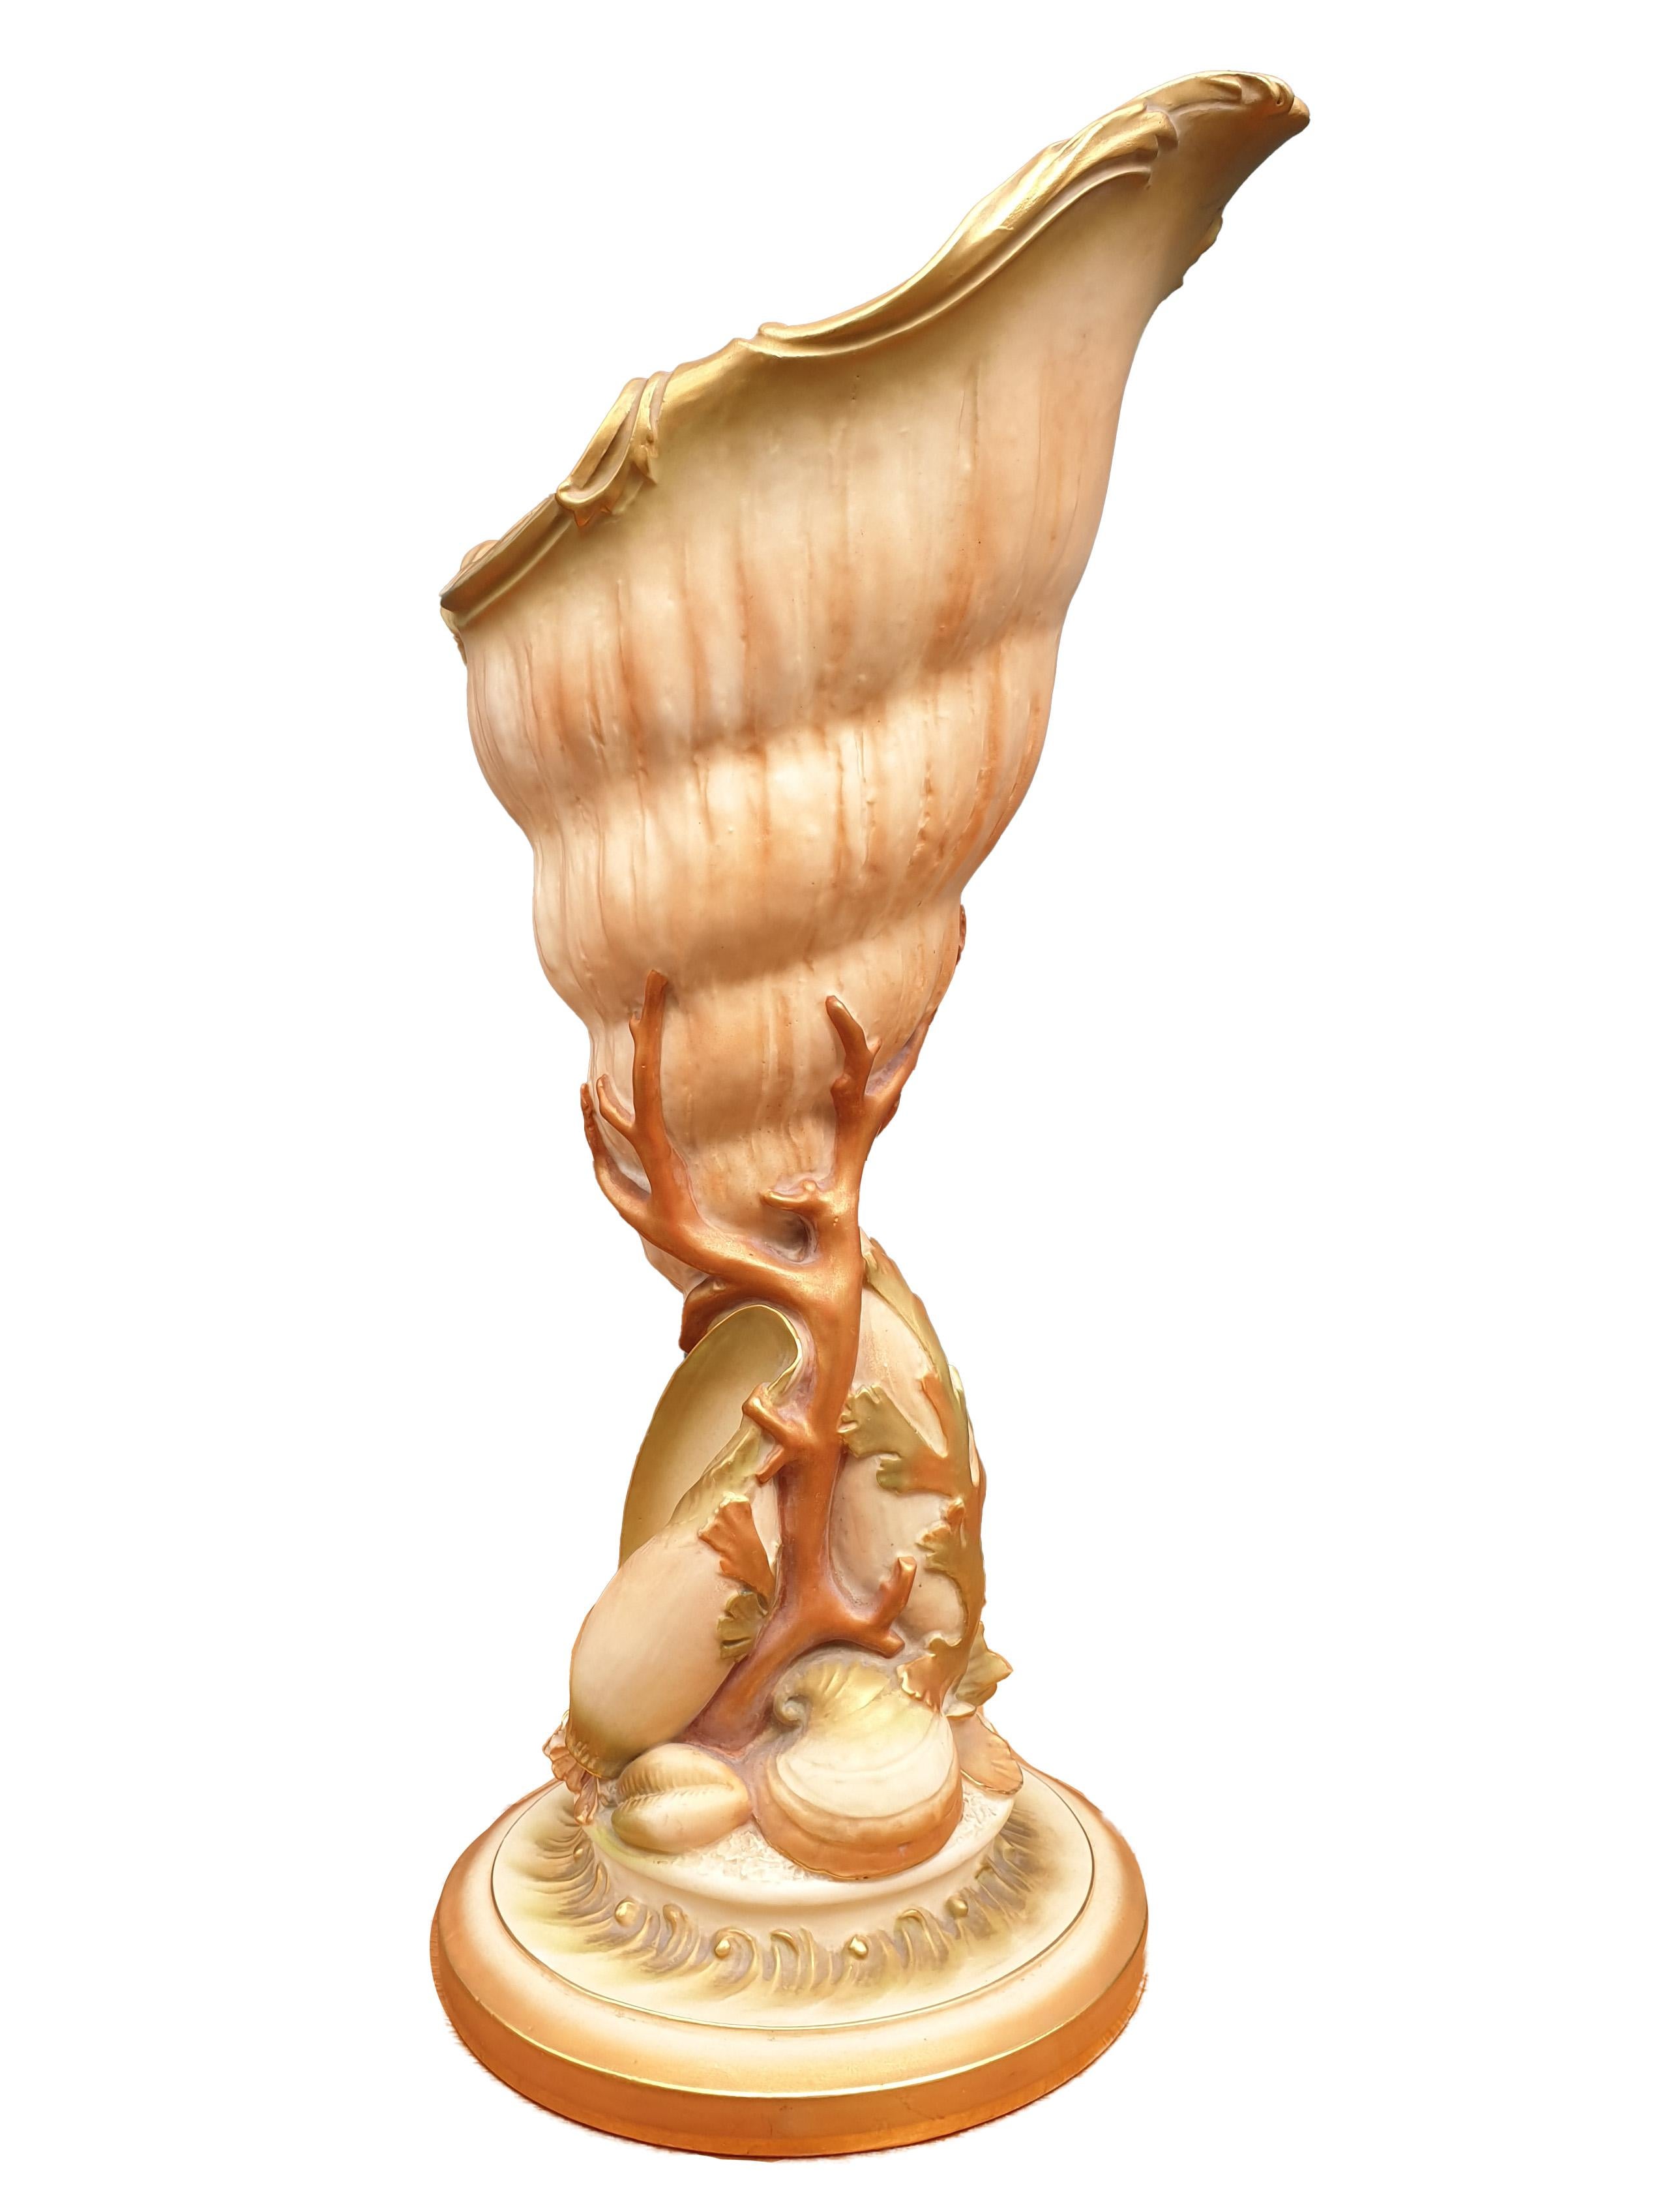 An impressive Royal Worcester Shell Vase, c. 1903, modeled in shape of a large shell with smaller shells leaves and pieces of corals adorning the base finished in blush ivory and gilt. Standing upright and with a peak towards the side the edges at